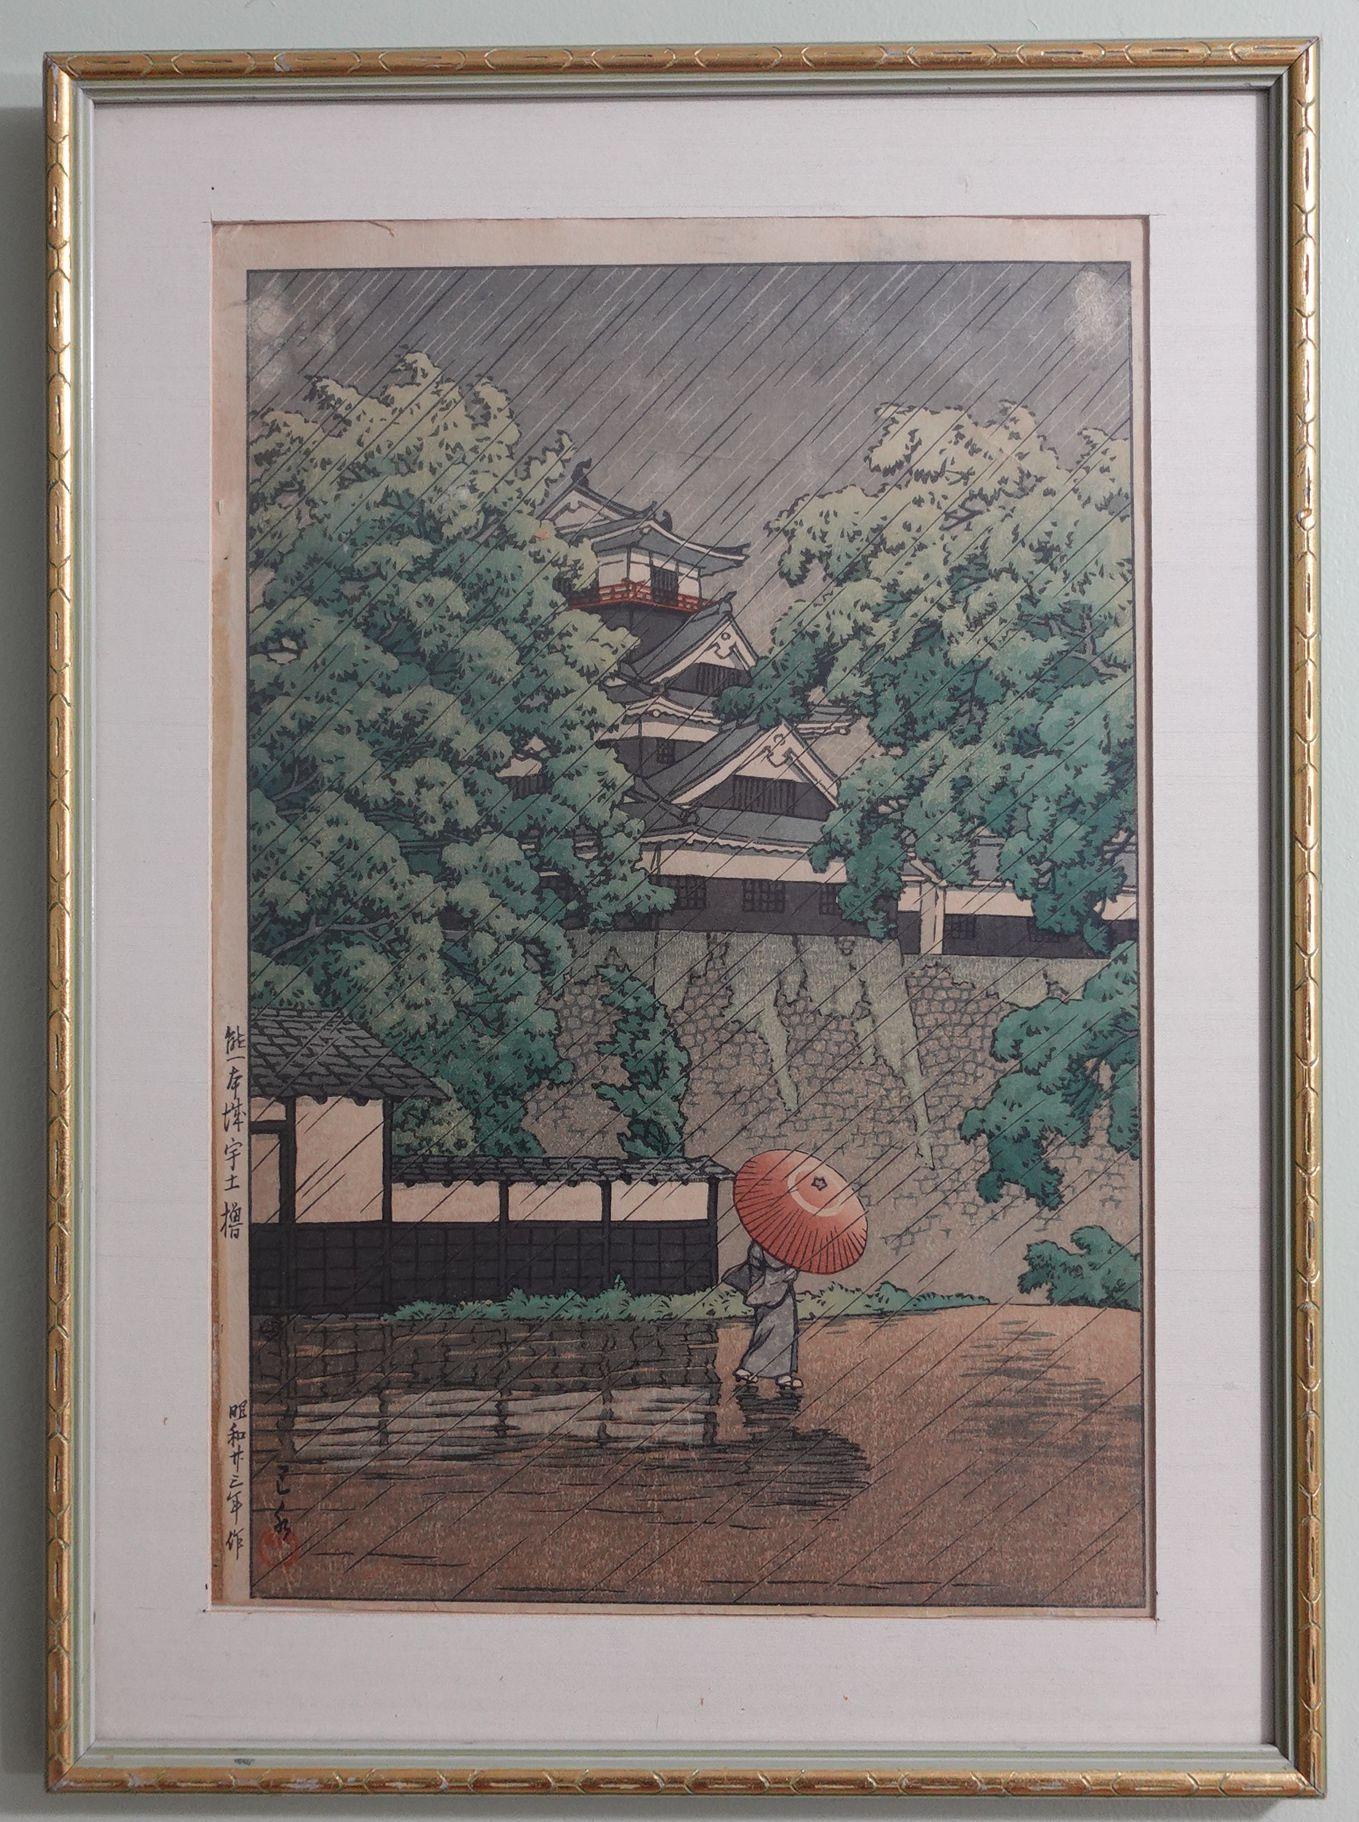 This woodblock depicts a figure caught in a rainstorm, carrying an umbrella outside a palace wall, sheet size 15 inches x 10.25 inches (38 x 26 cm)

About the artist
Hasui Kawase’s (1883-1957) prints are characterized by their serenity of mood